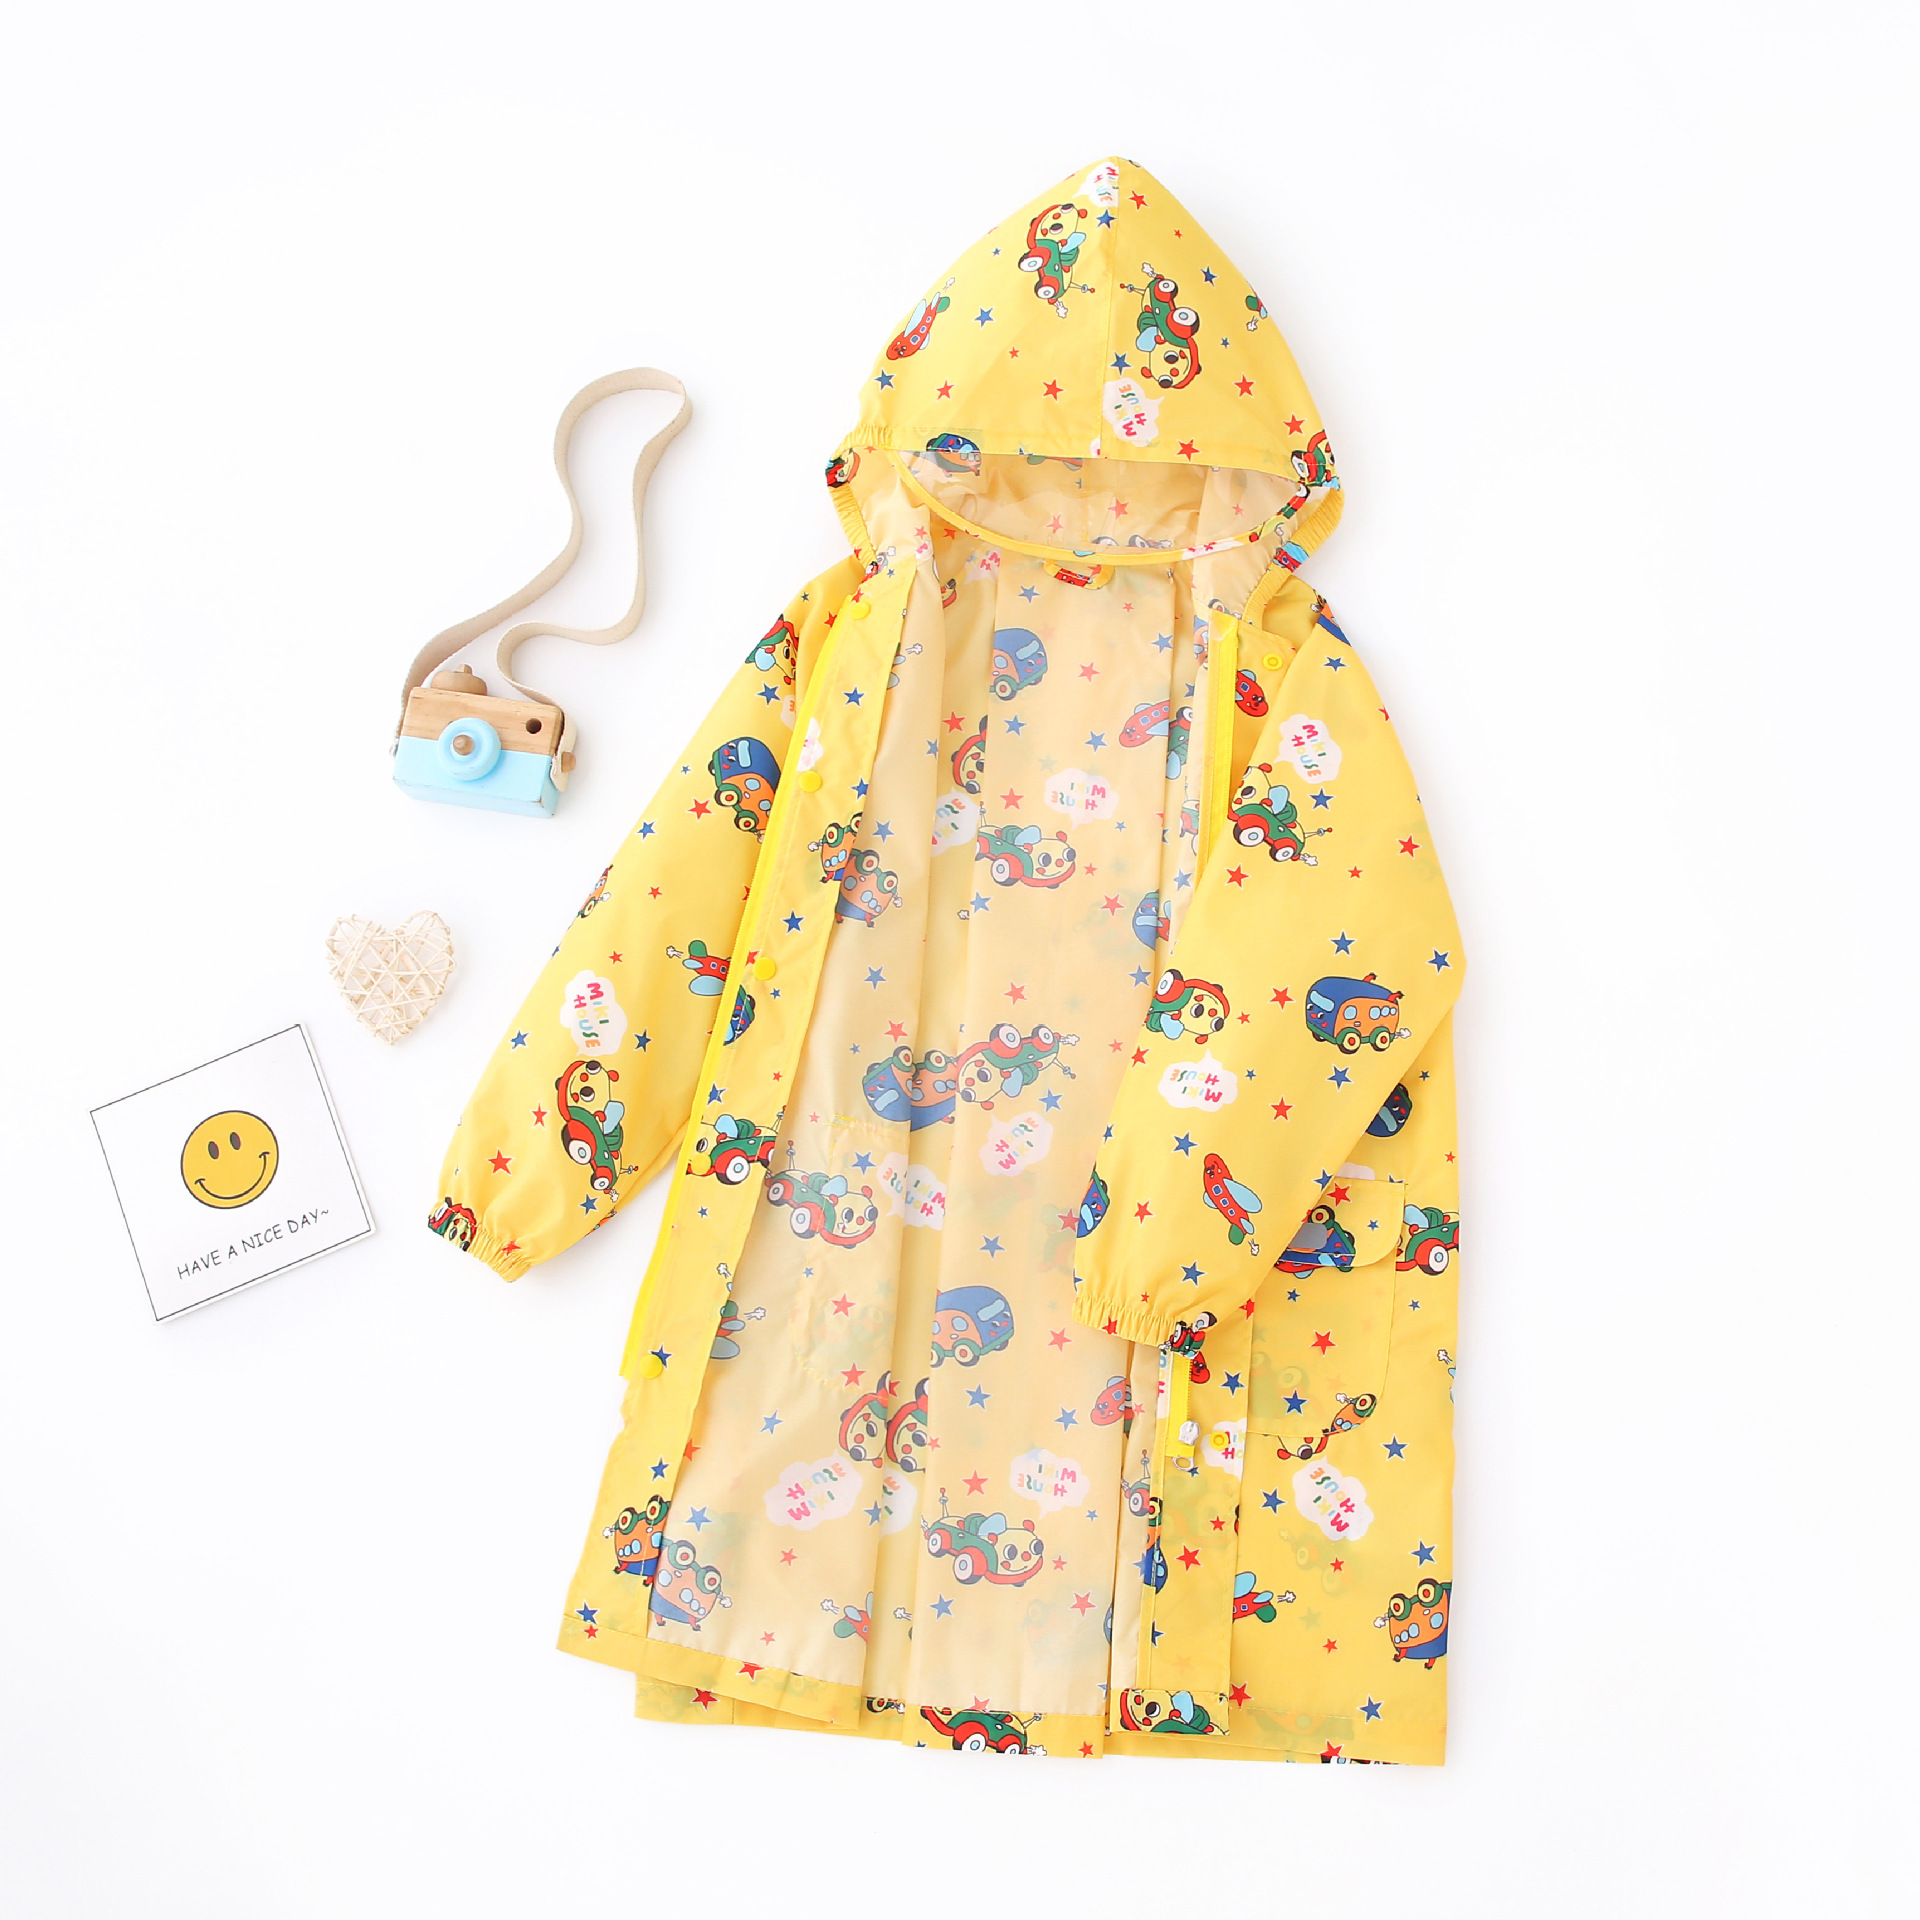 waterproof polyester raincoat lovely printing children raincoat for kids rain coat rain poncho with schoolbag place